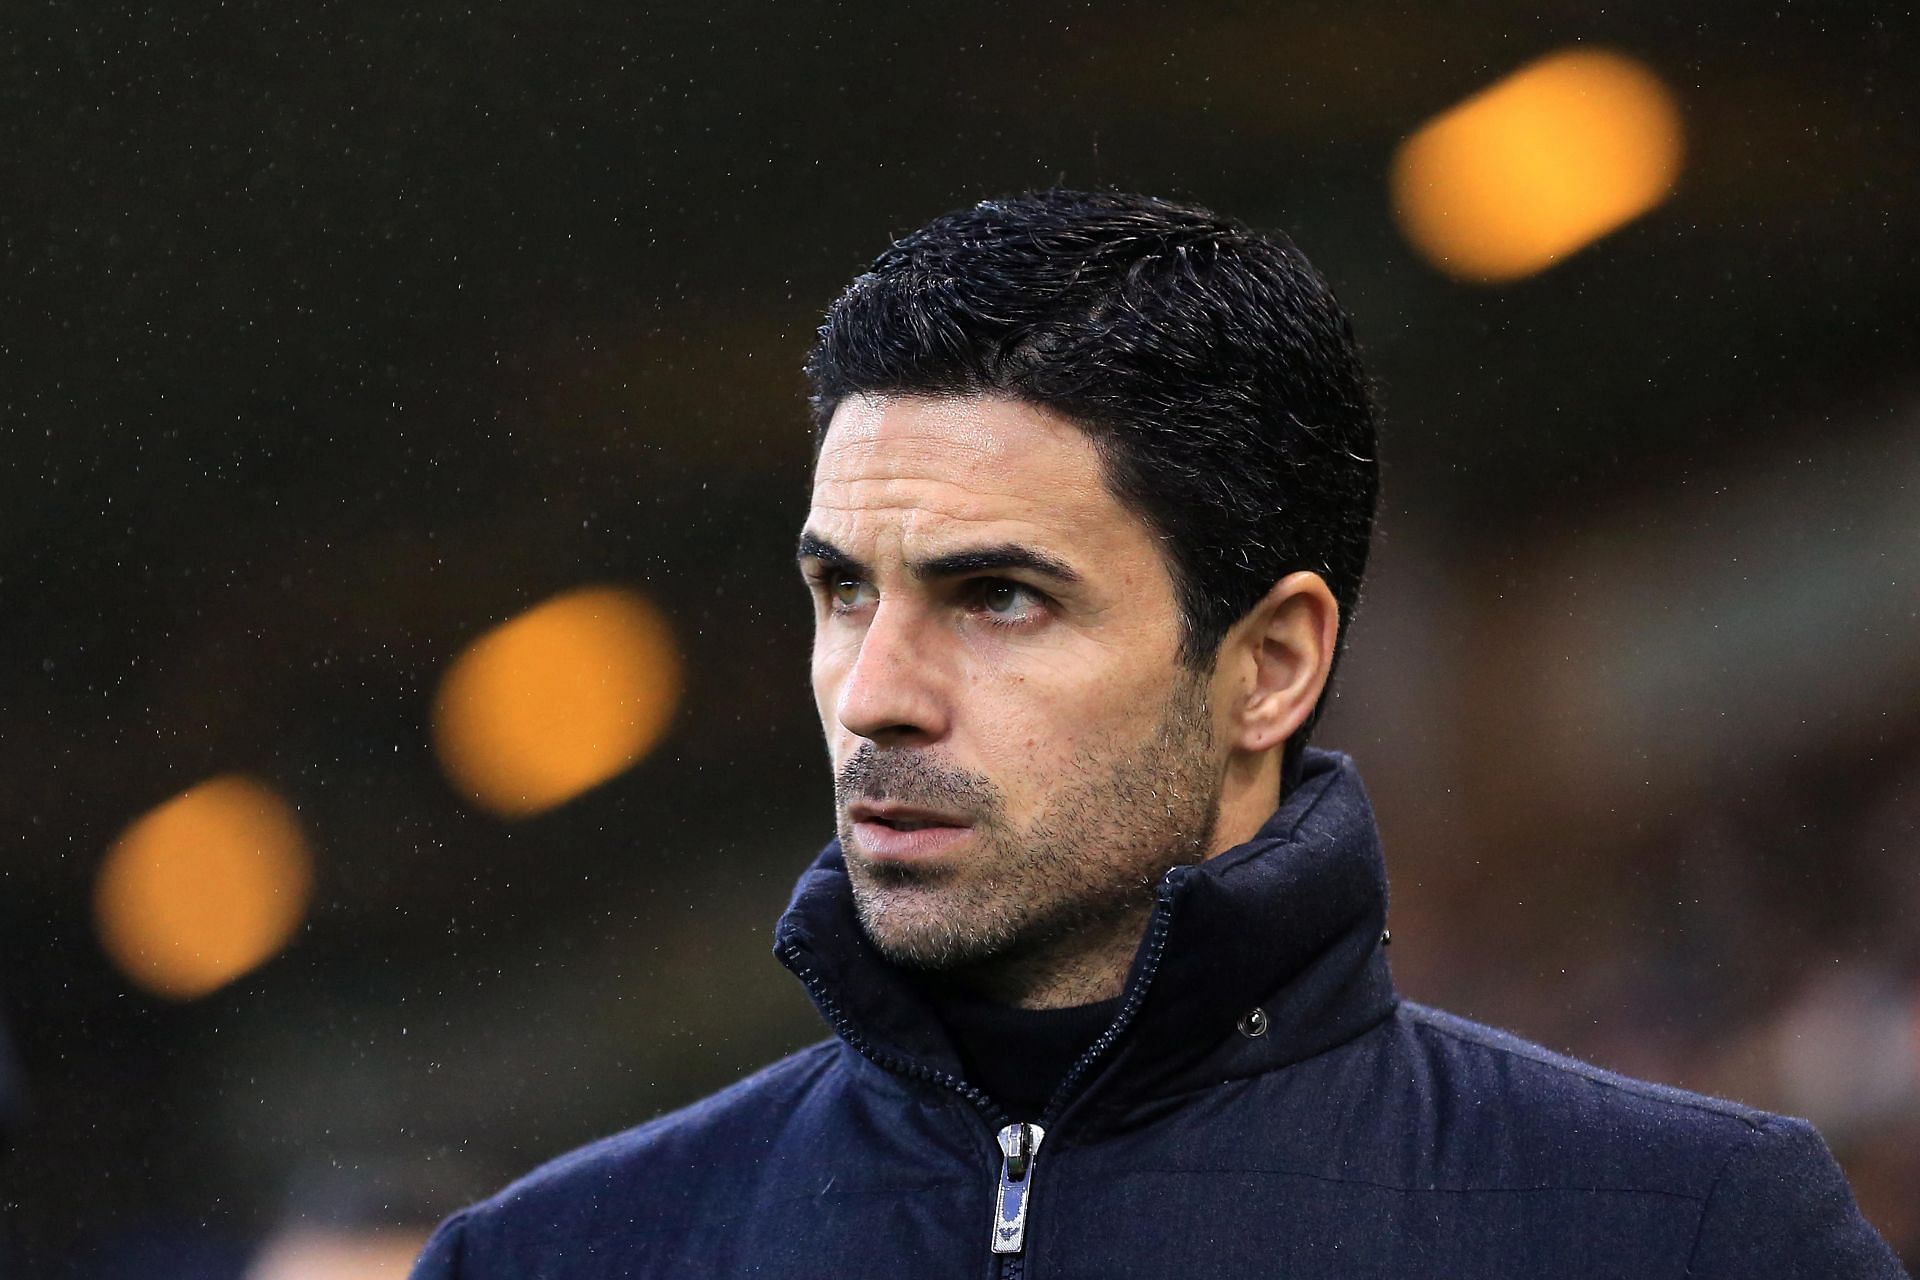 Arsenal manager Mikel Arteta oversaw a resounding victory over Norwich City in the Premier League